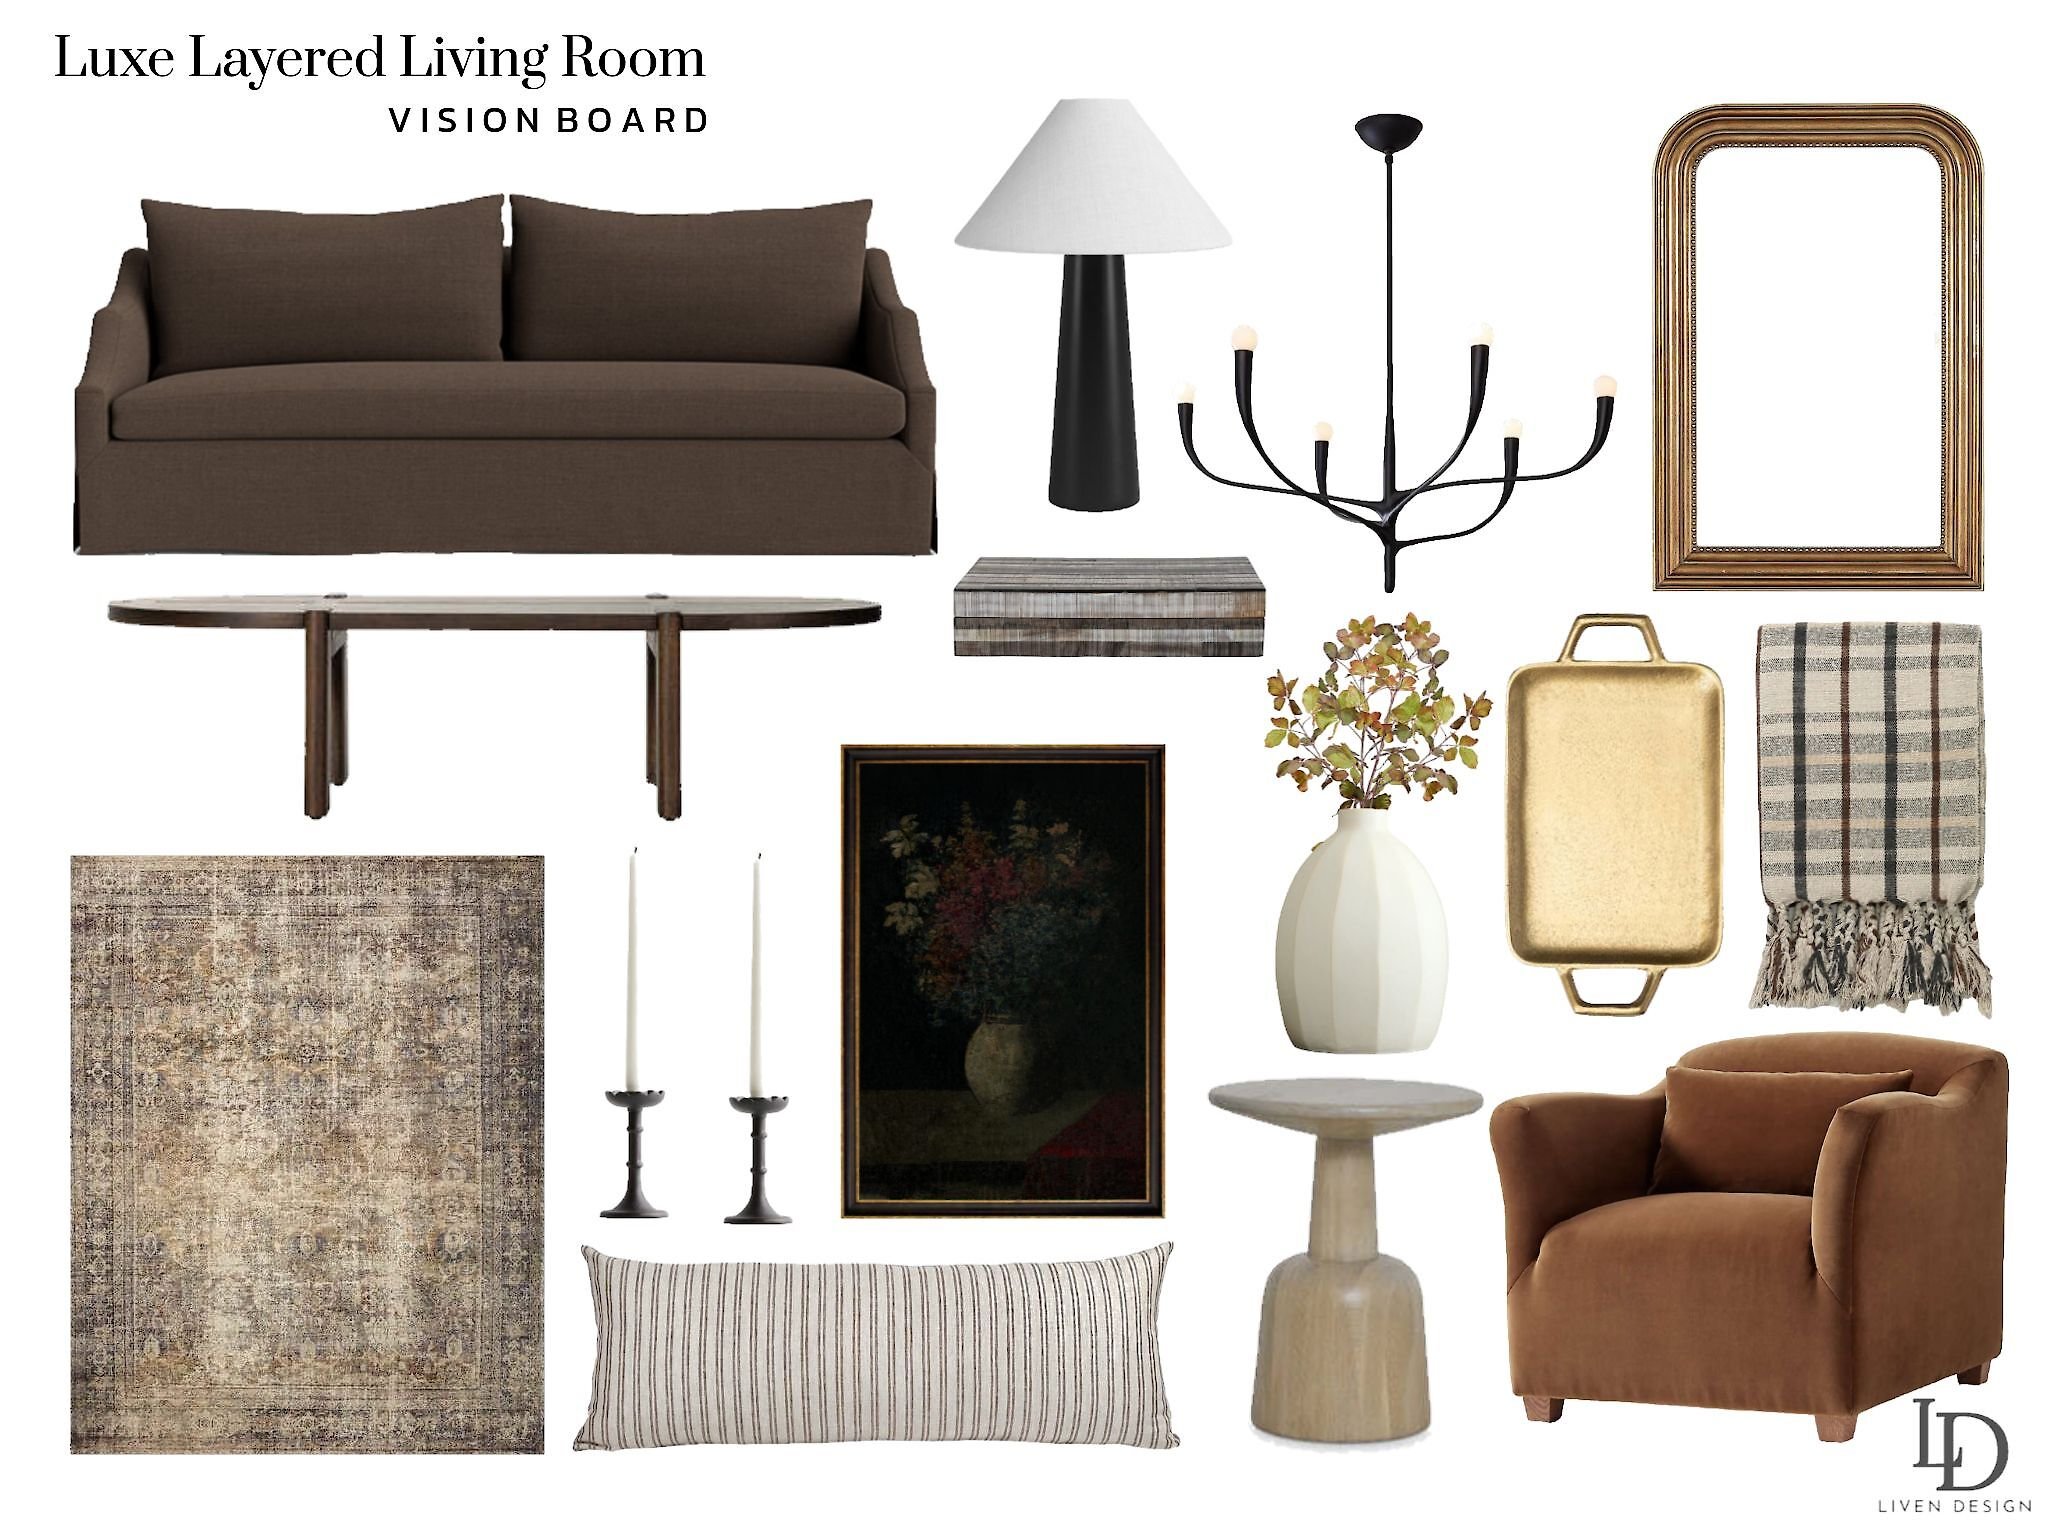 luxe layered edesign vision board.jpg